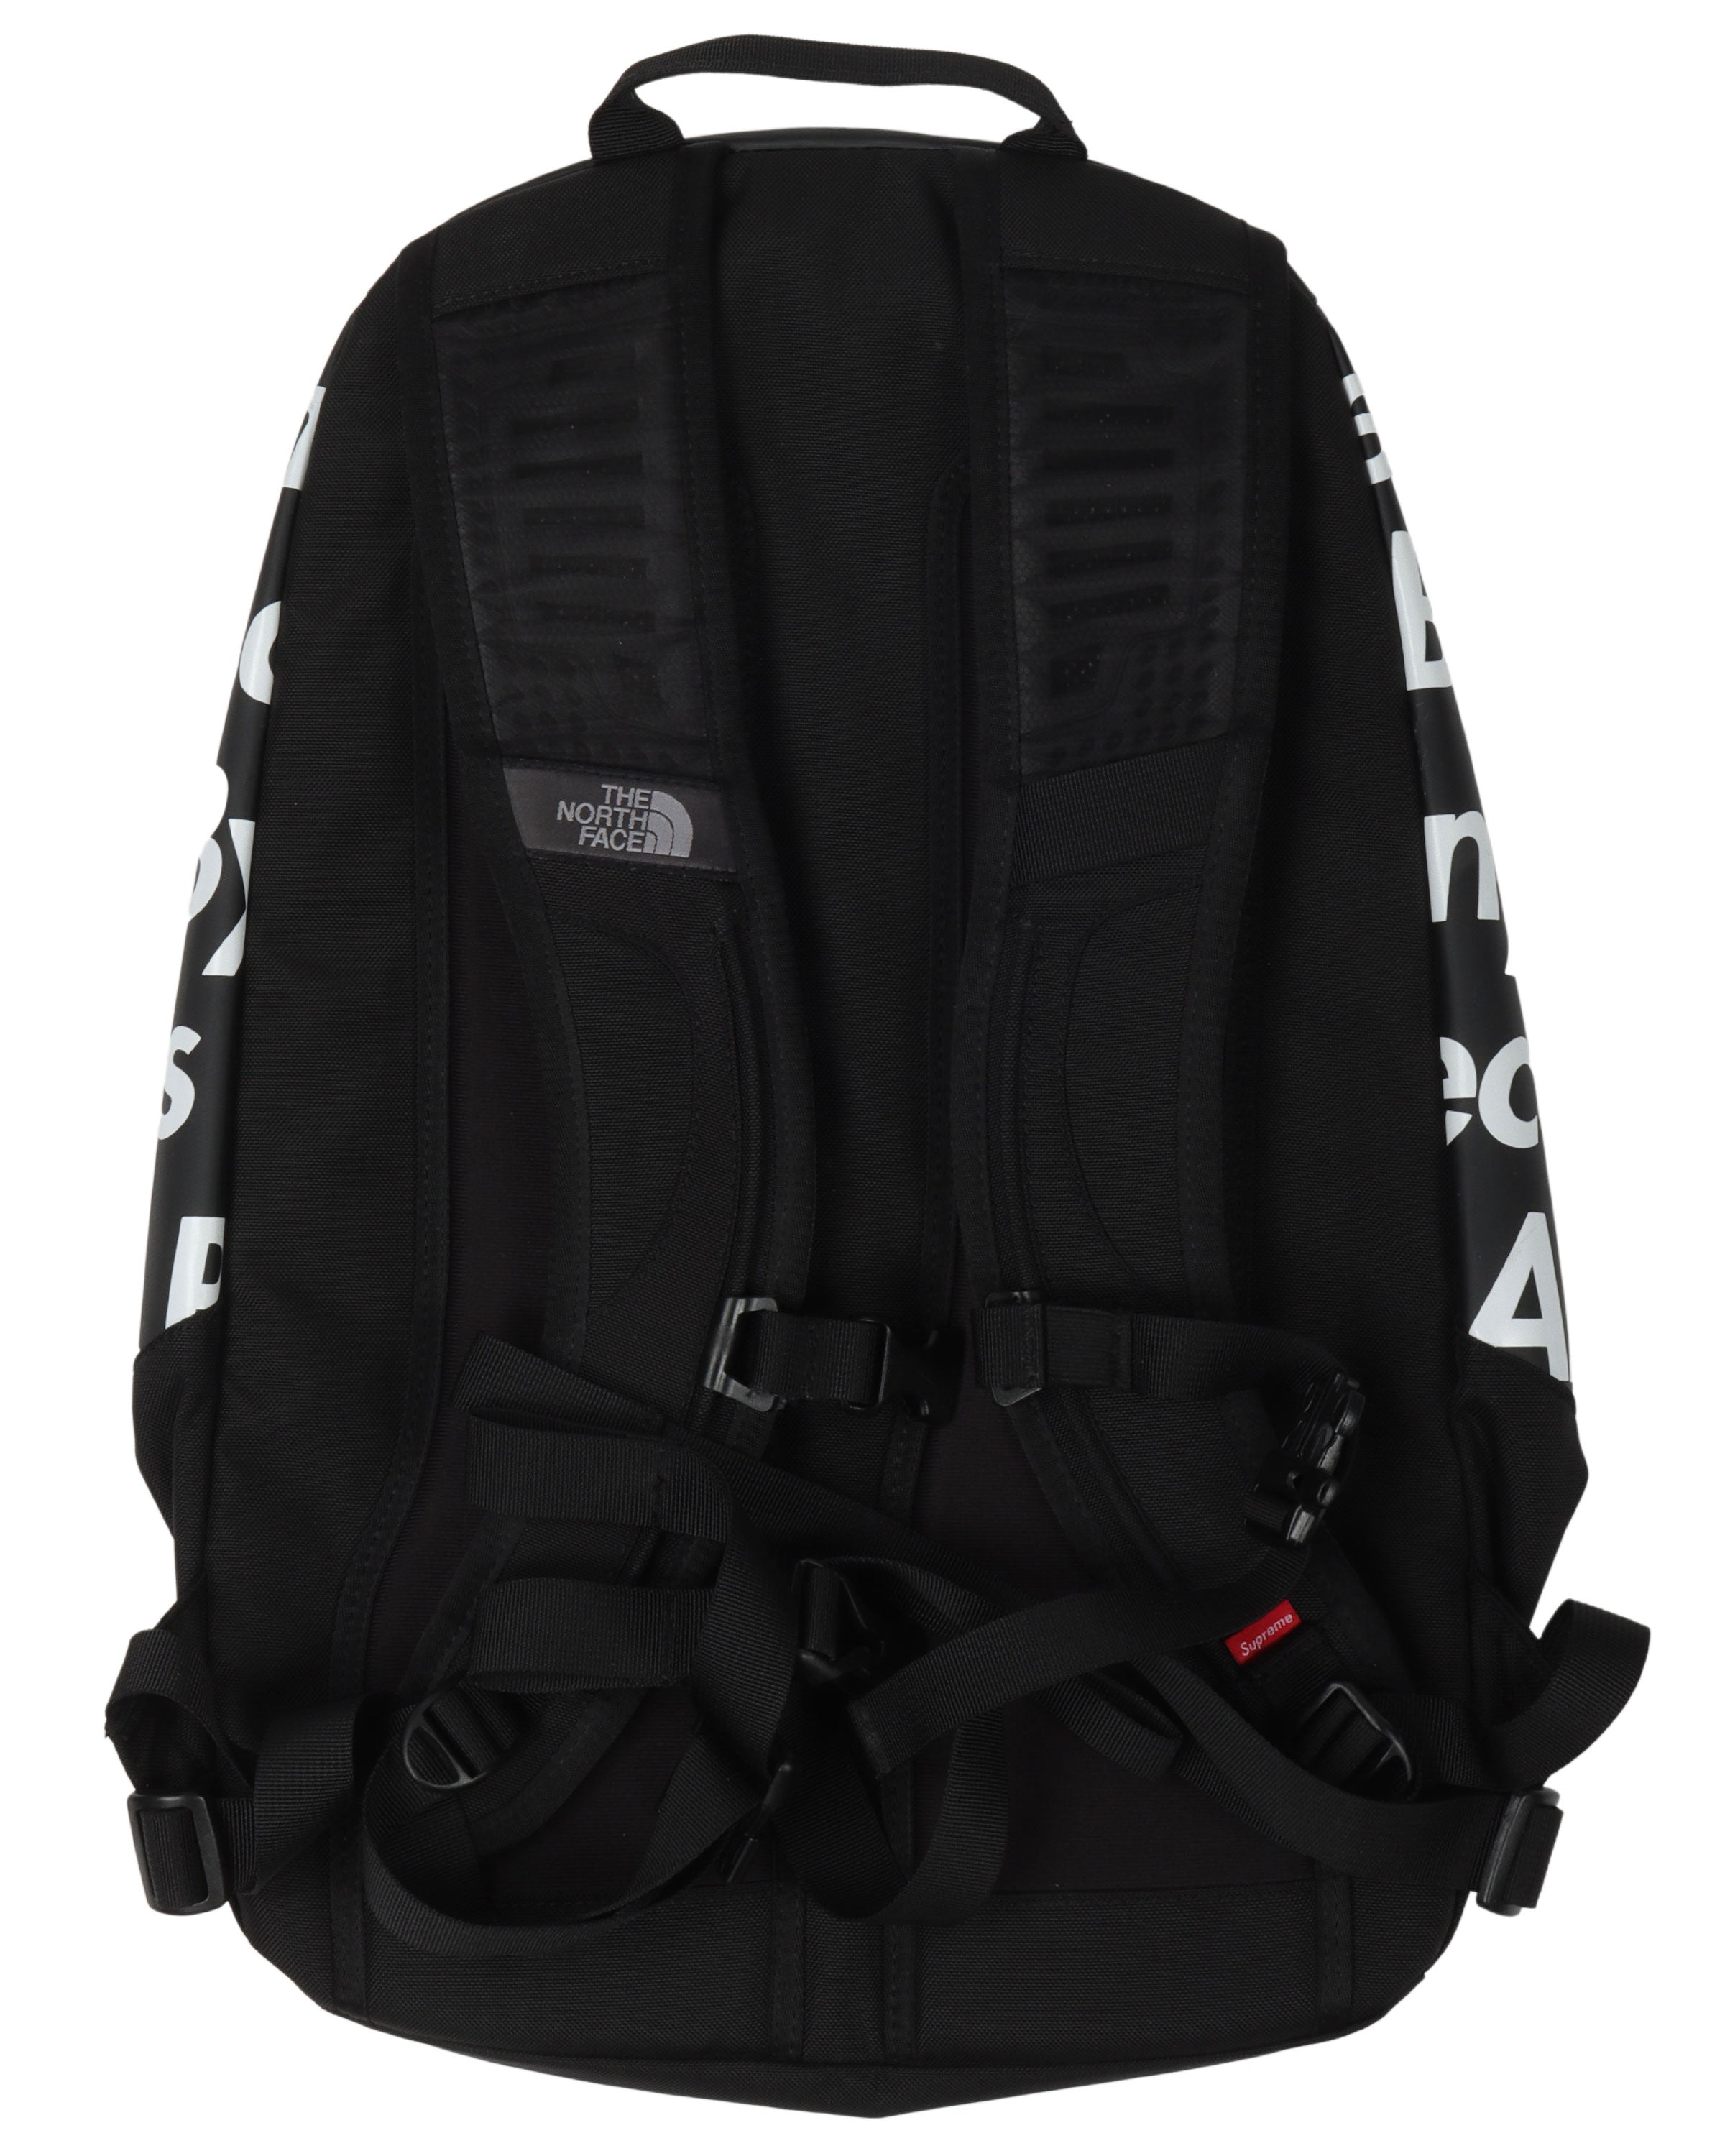 SS15 The North Face By Any Means Necessary Backpack